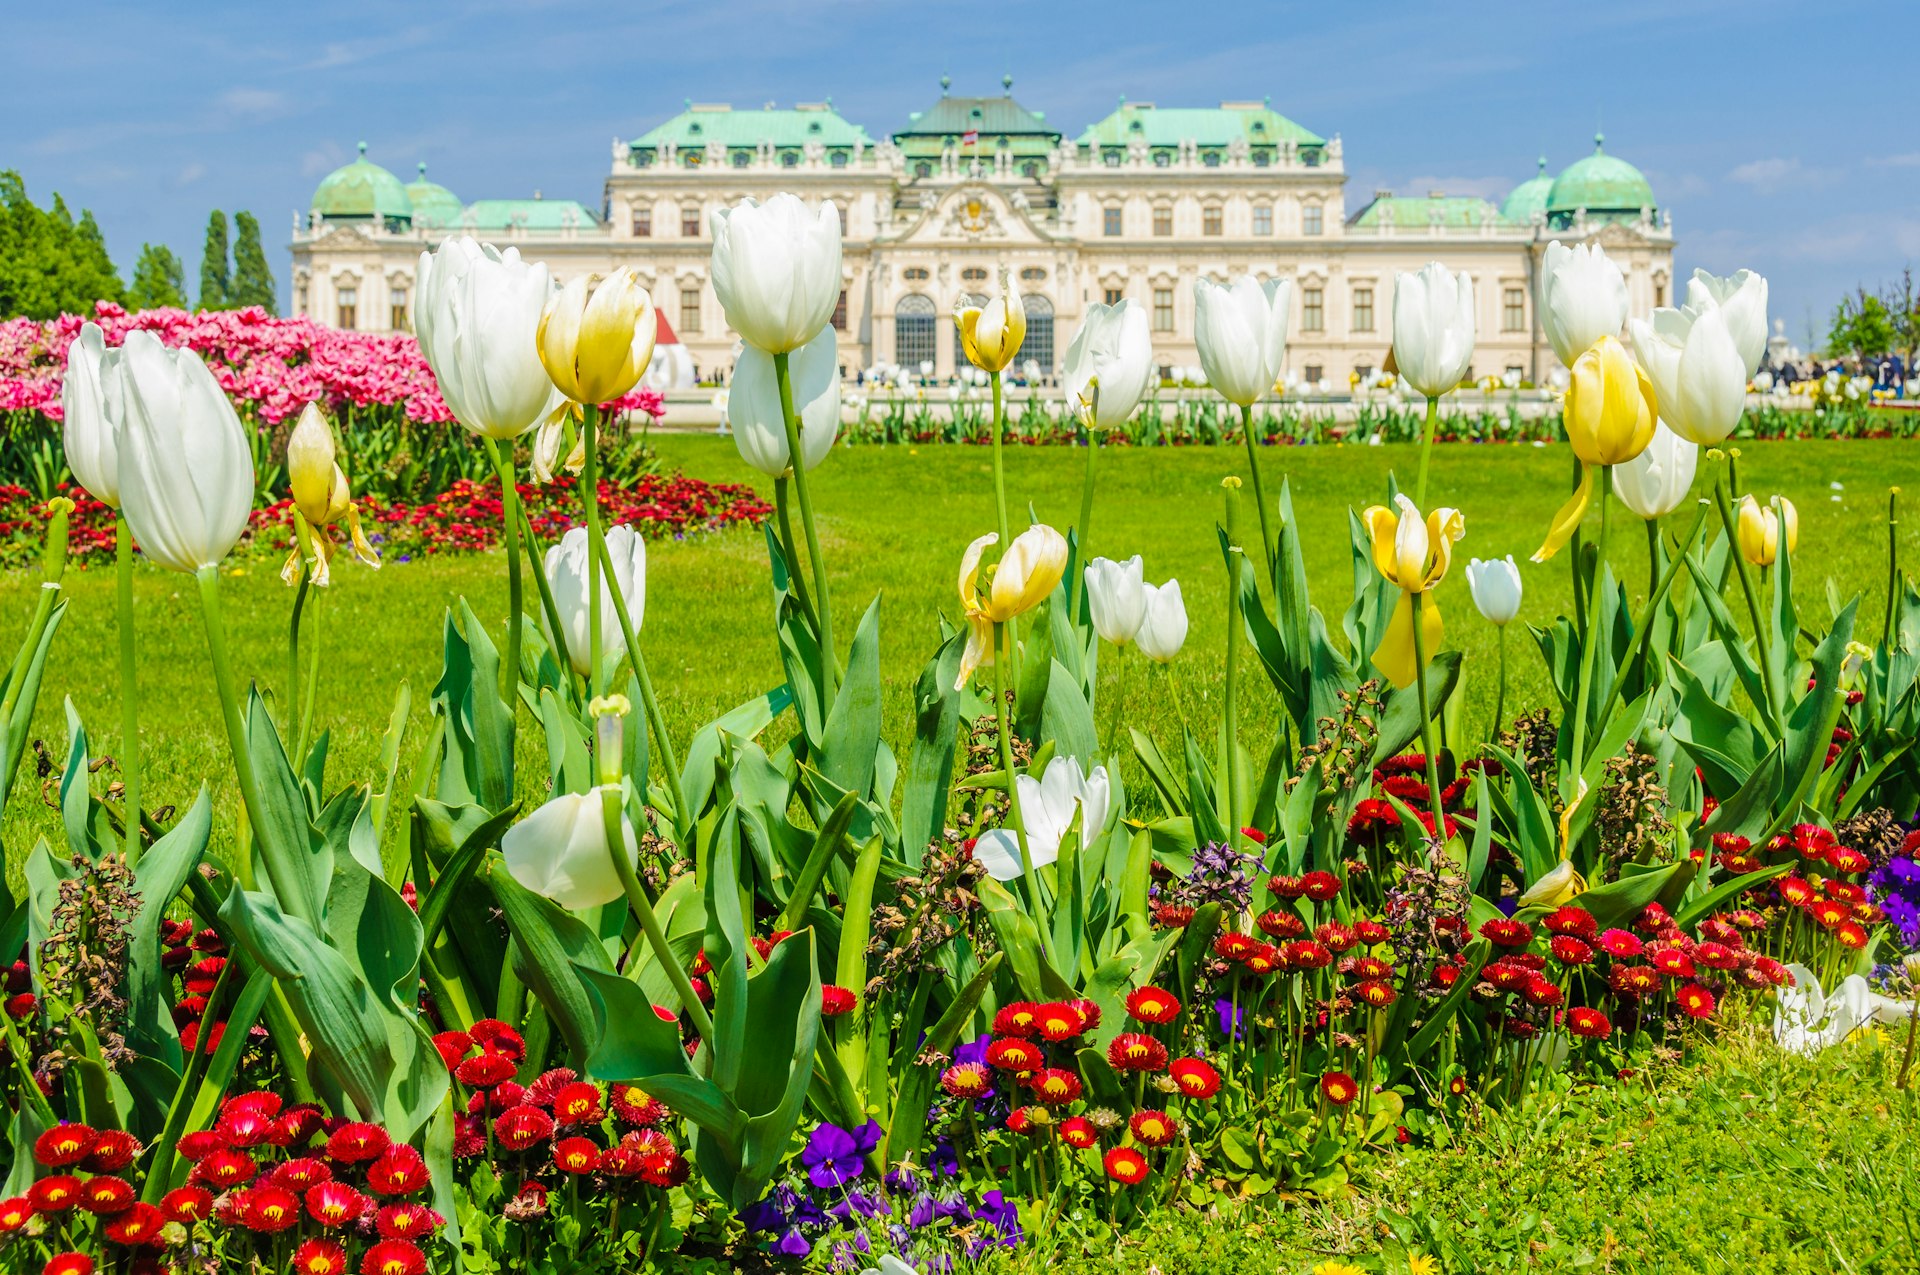 Tulips sit in the foreground, with Vienna's Belvedere palace in the background